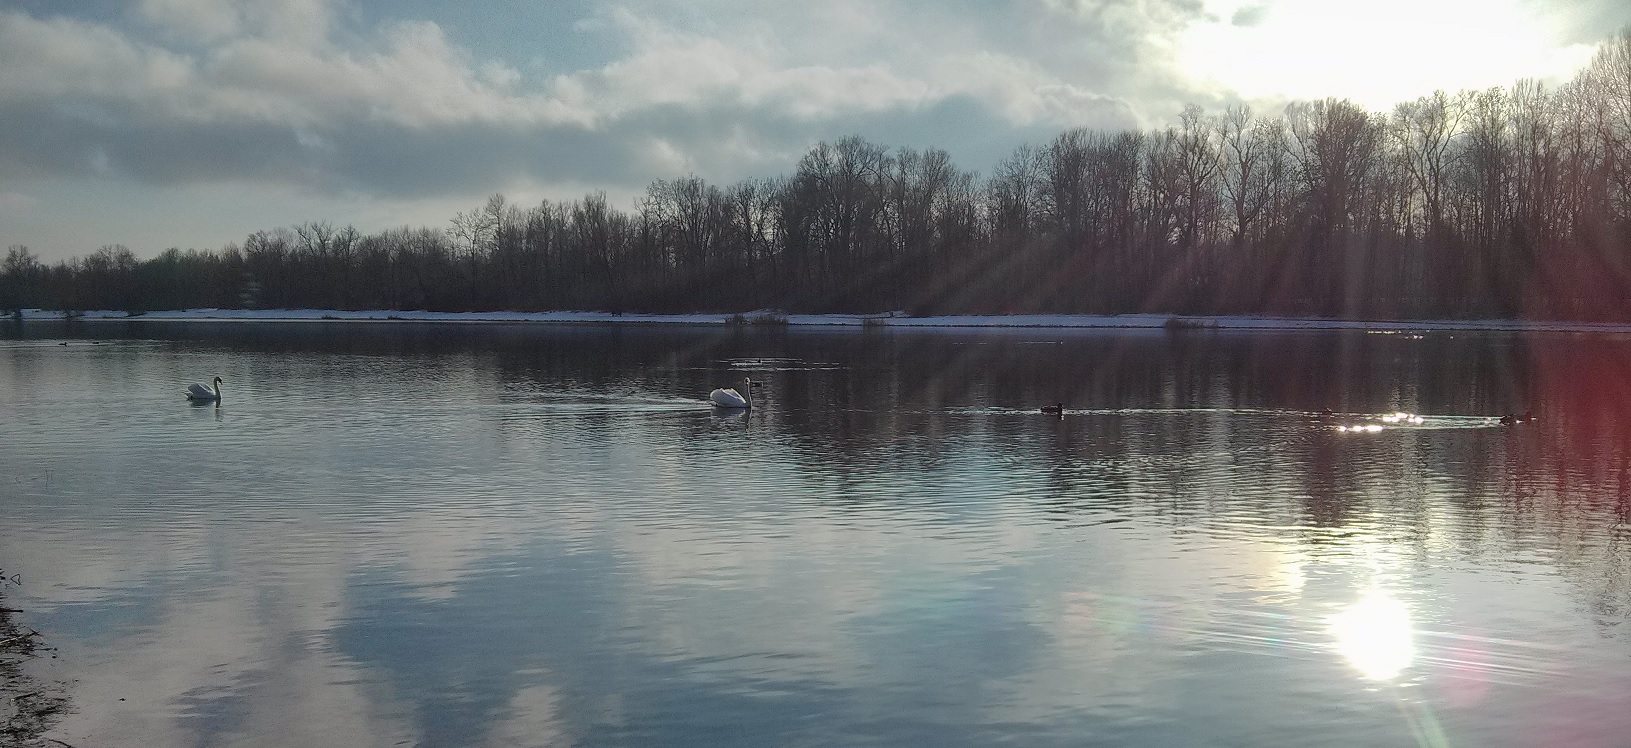 swans on a lake illustrating the article about the human rights checklist